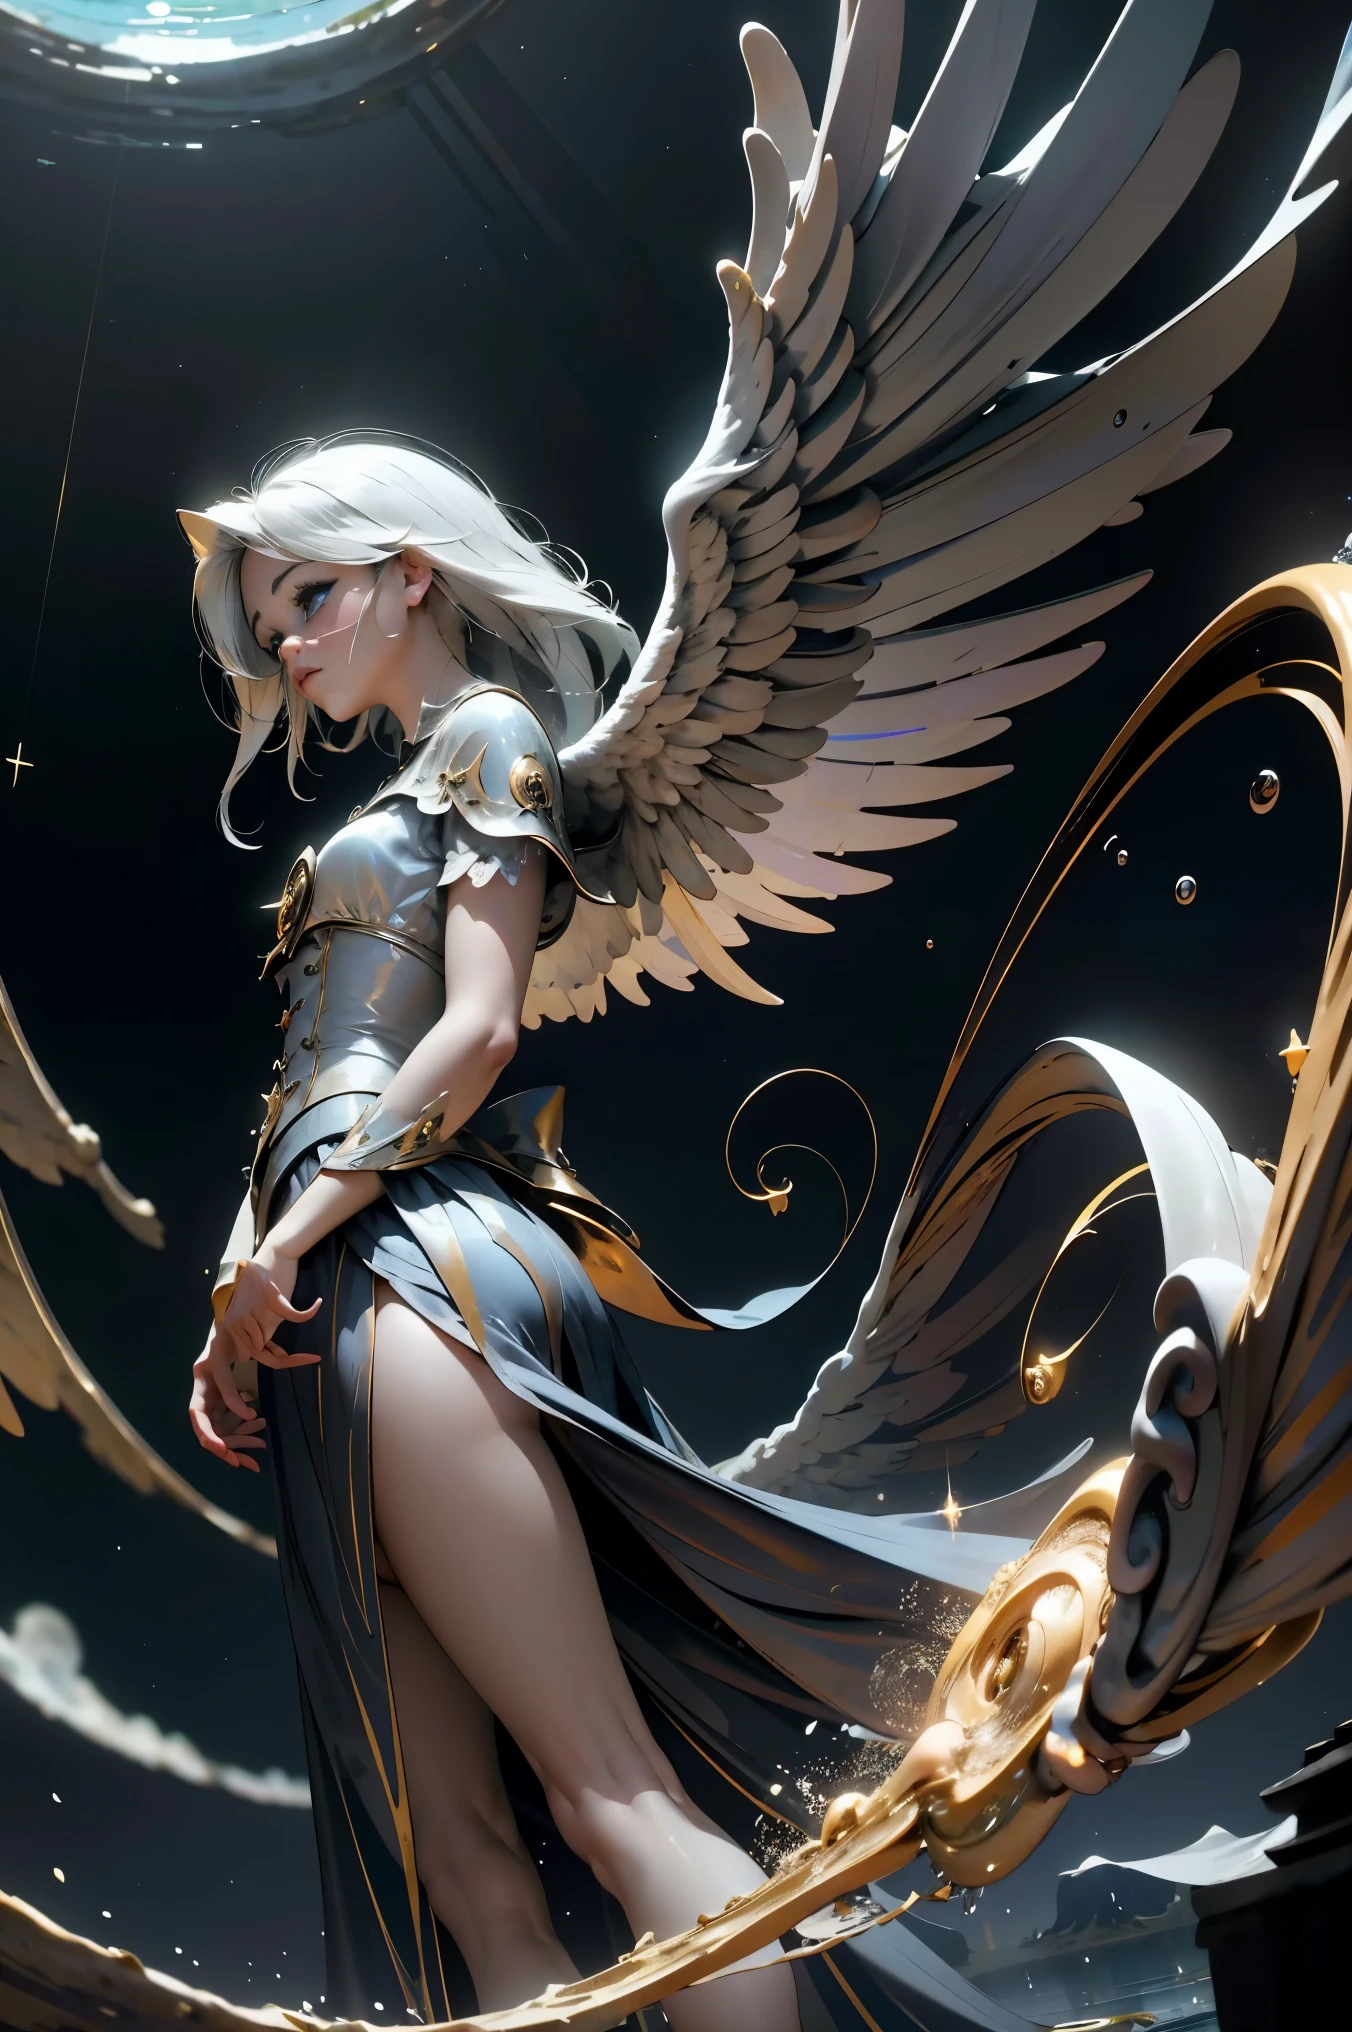 Masterpiece, (The best quality:1.2), [:intricate details:0.2], 1 girl, BIG BREASTS, angel, angel wings, white ruffles, (daytime sky), bright aura, intense concentration, crackling energy, mysterious symbols, bright specks,